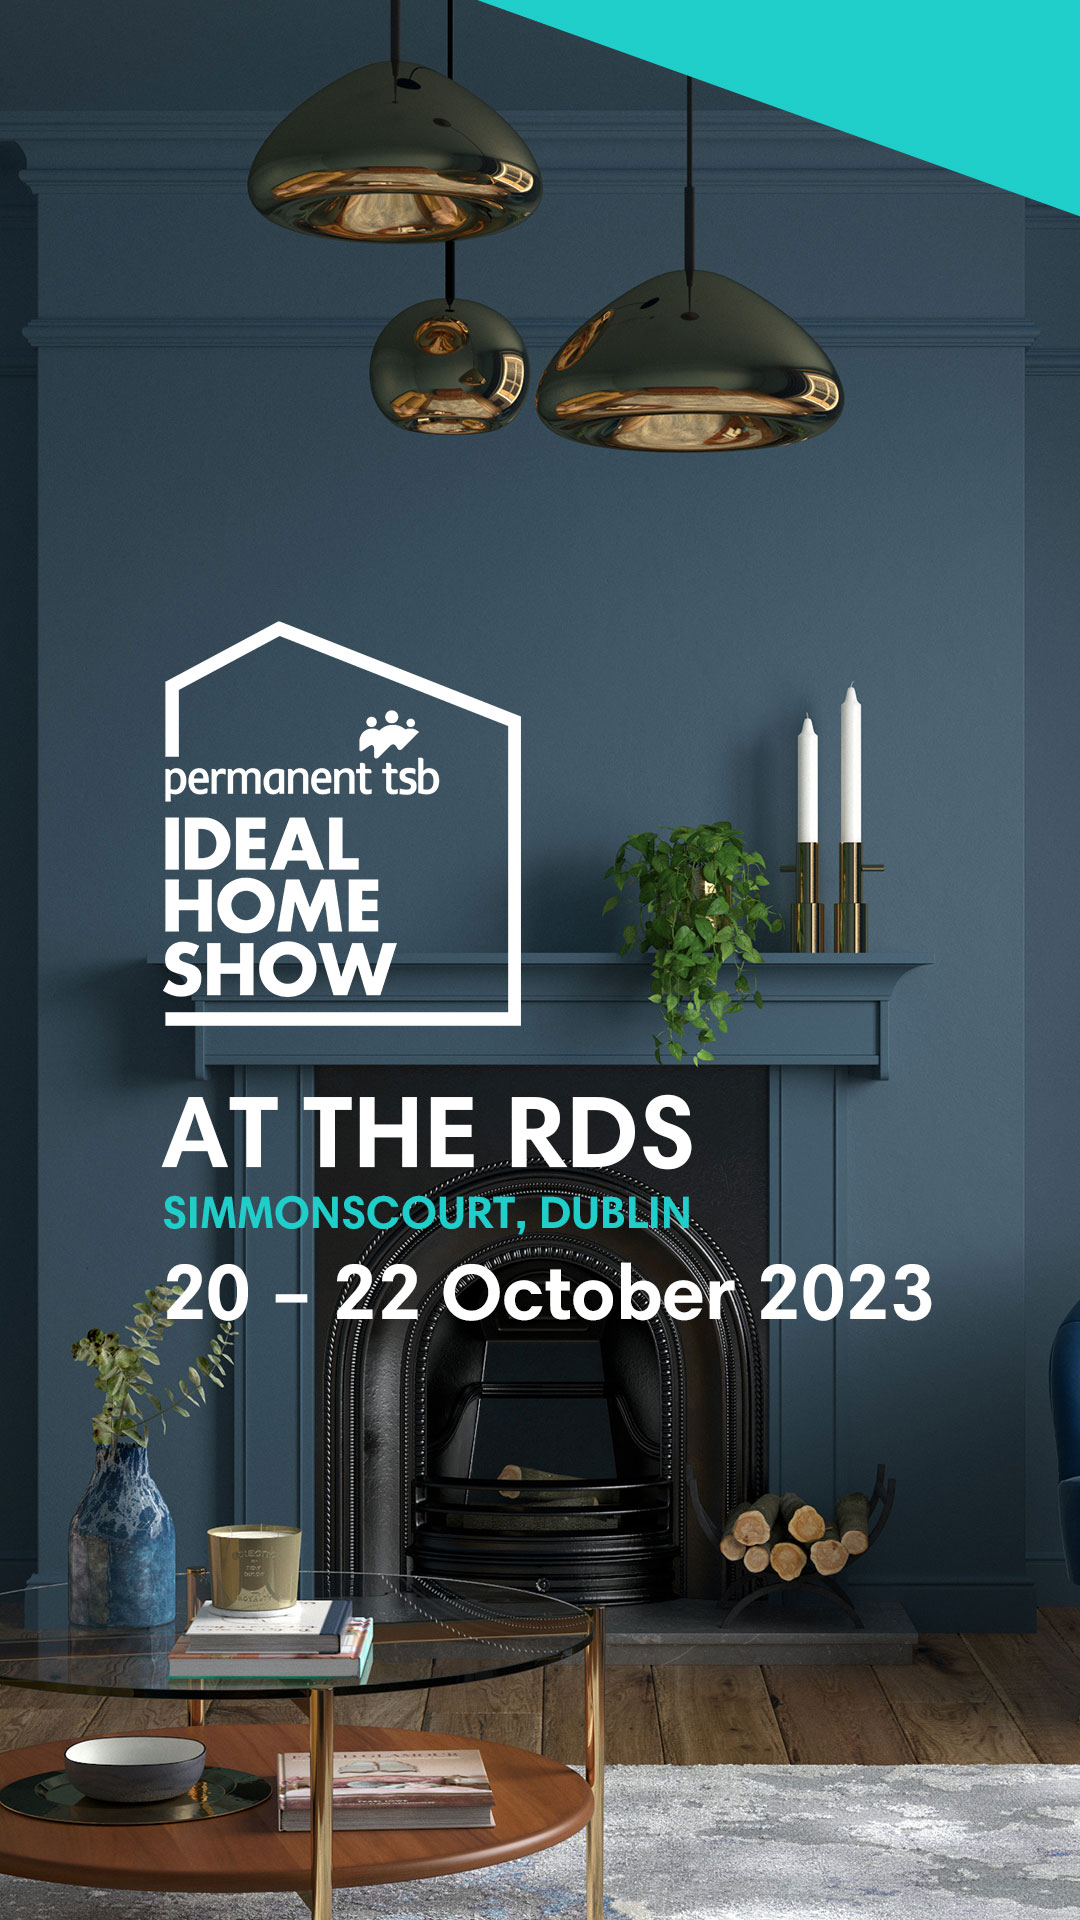 Promote Your Brand Ideal Home Show